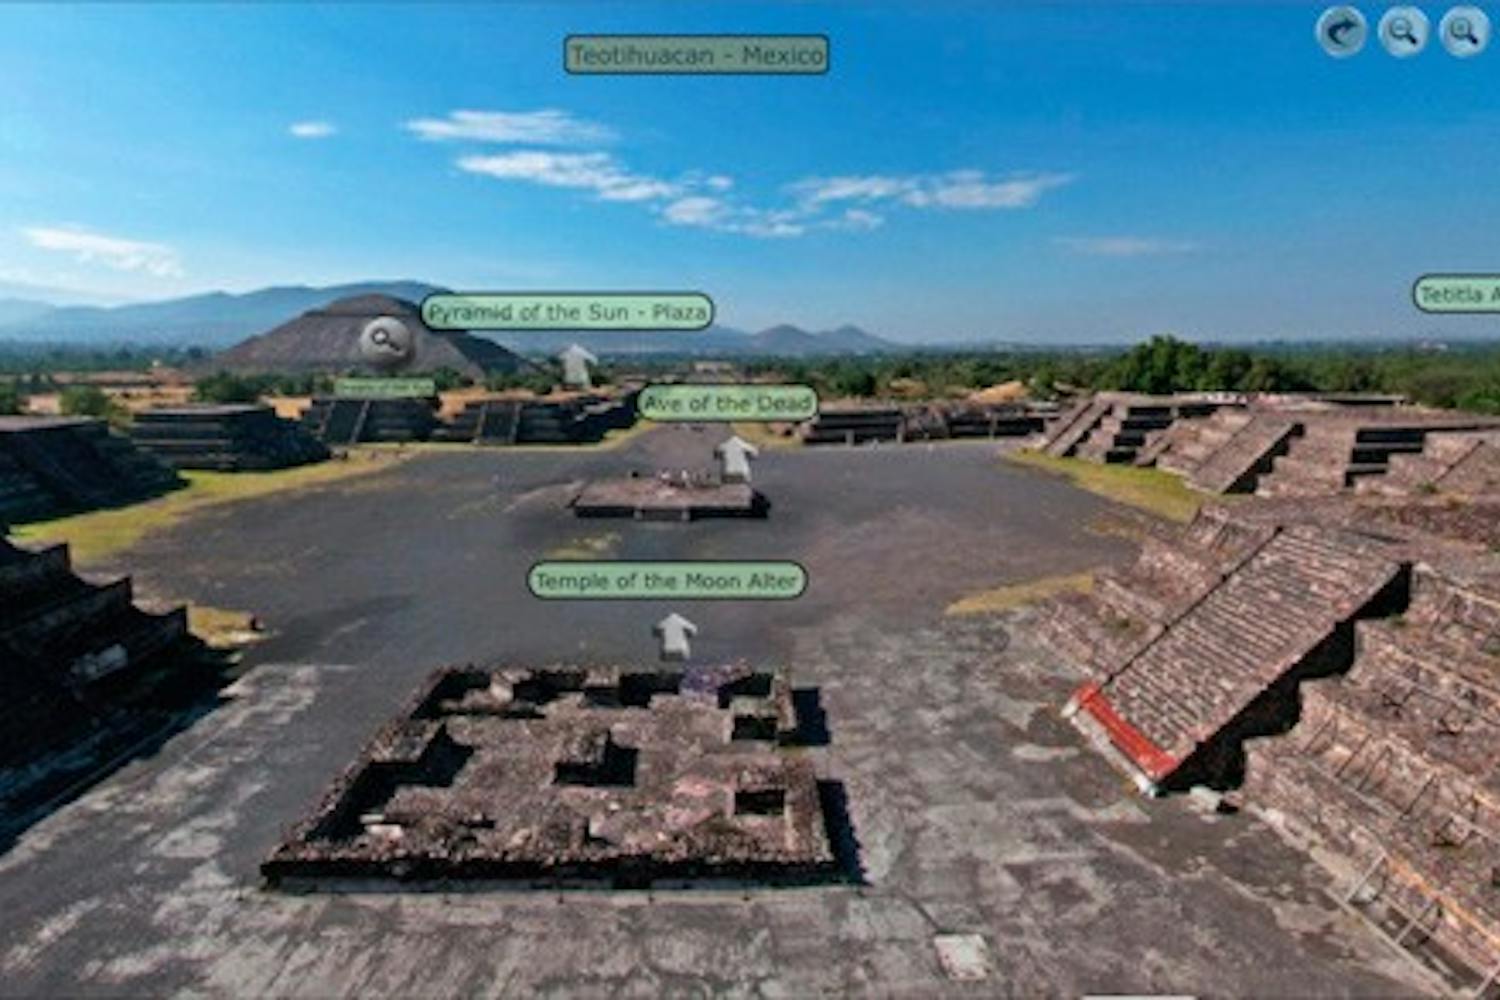 An iVFT to Teotihuacan, Mexico, teaches users about early civilizations. (Photo courtesy of Steven Semken)